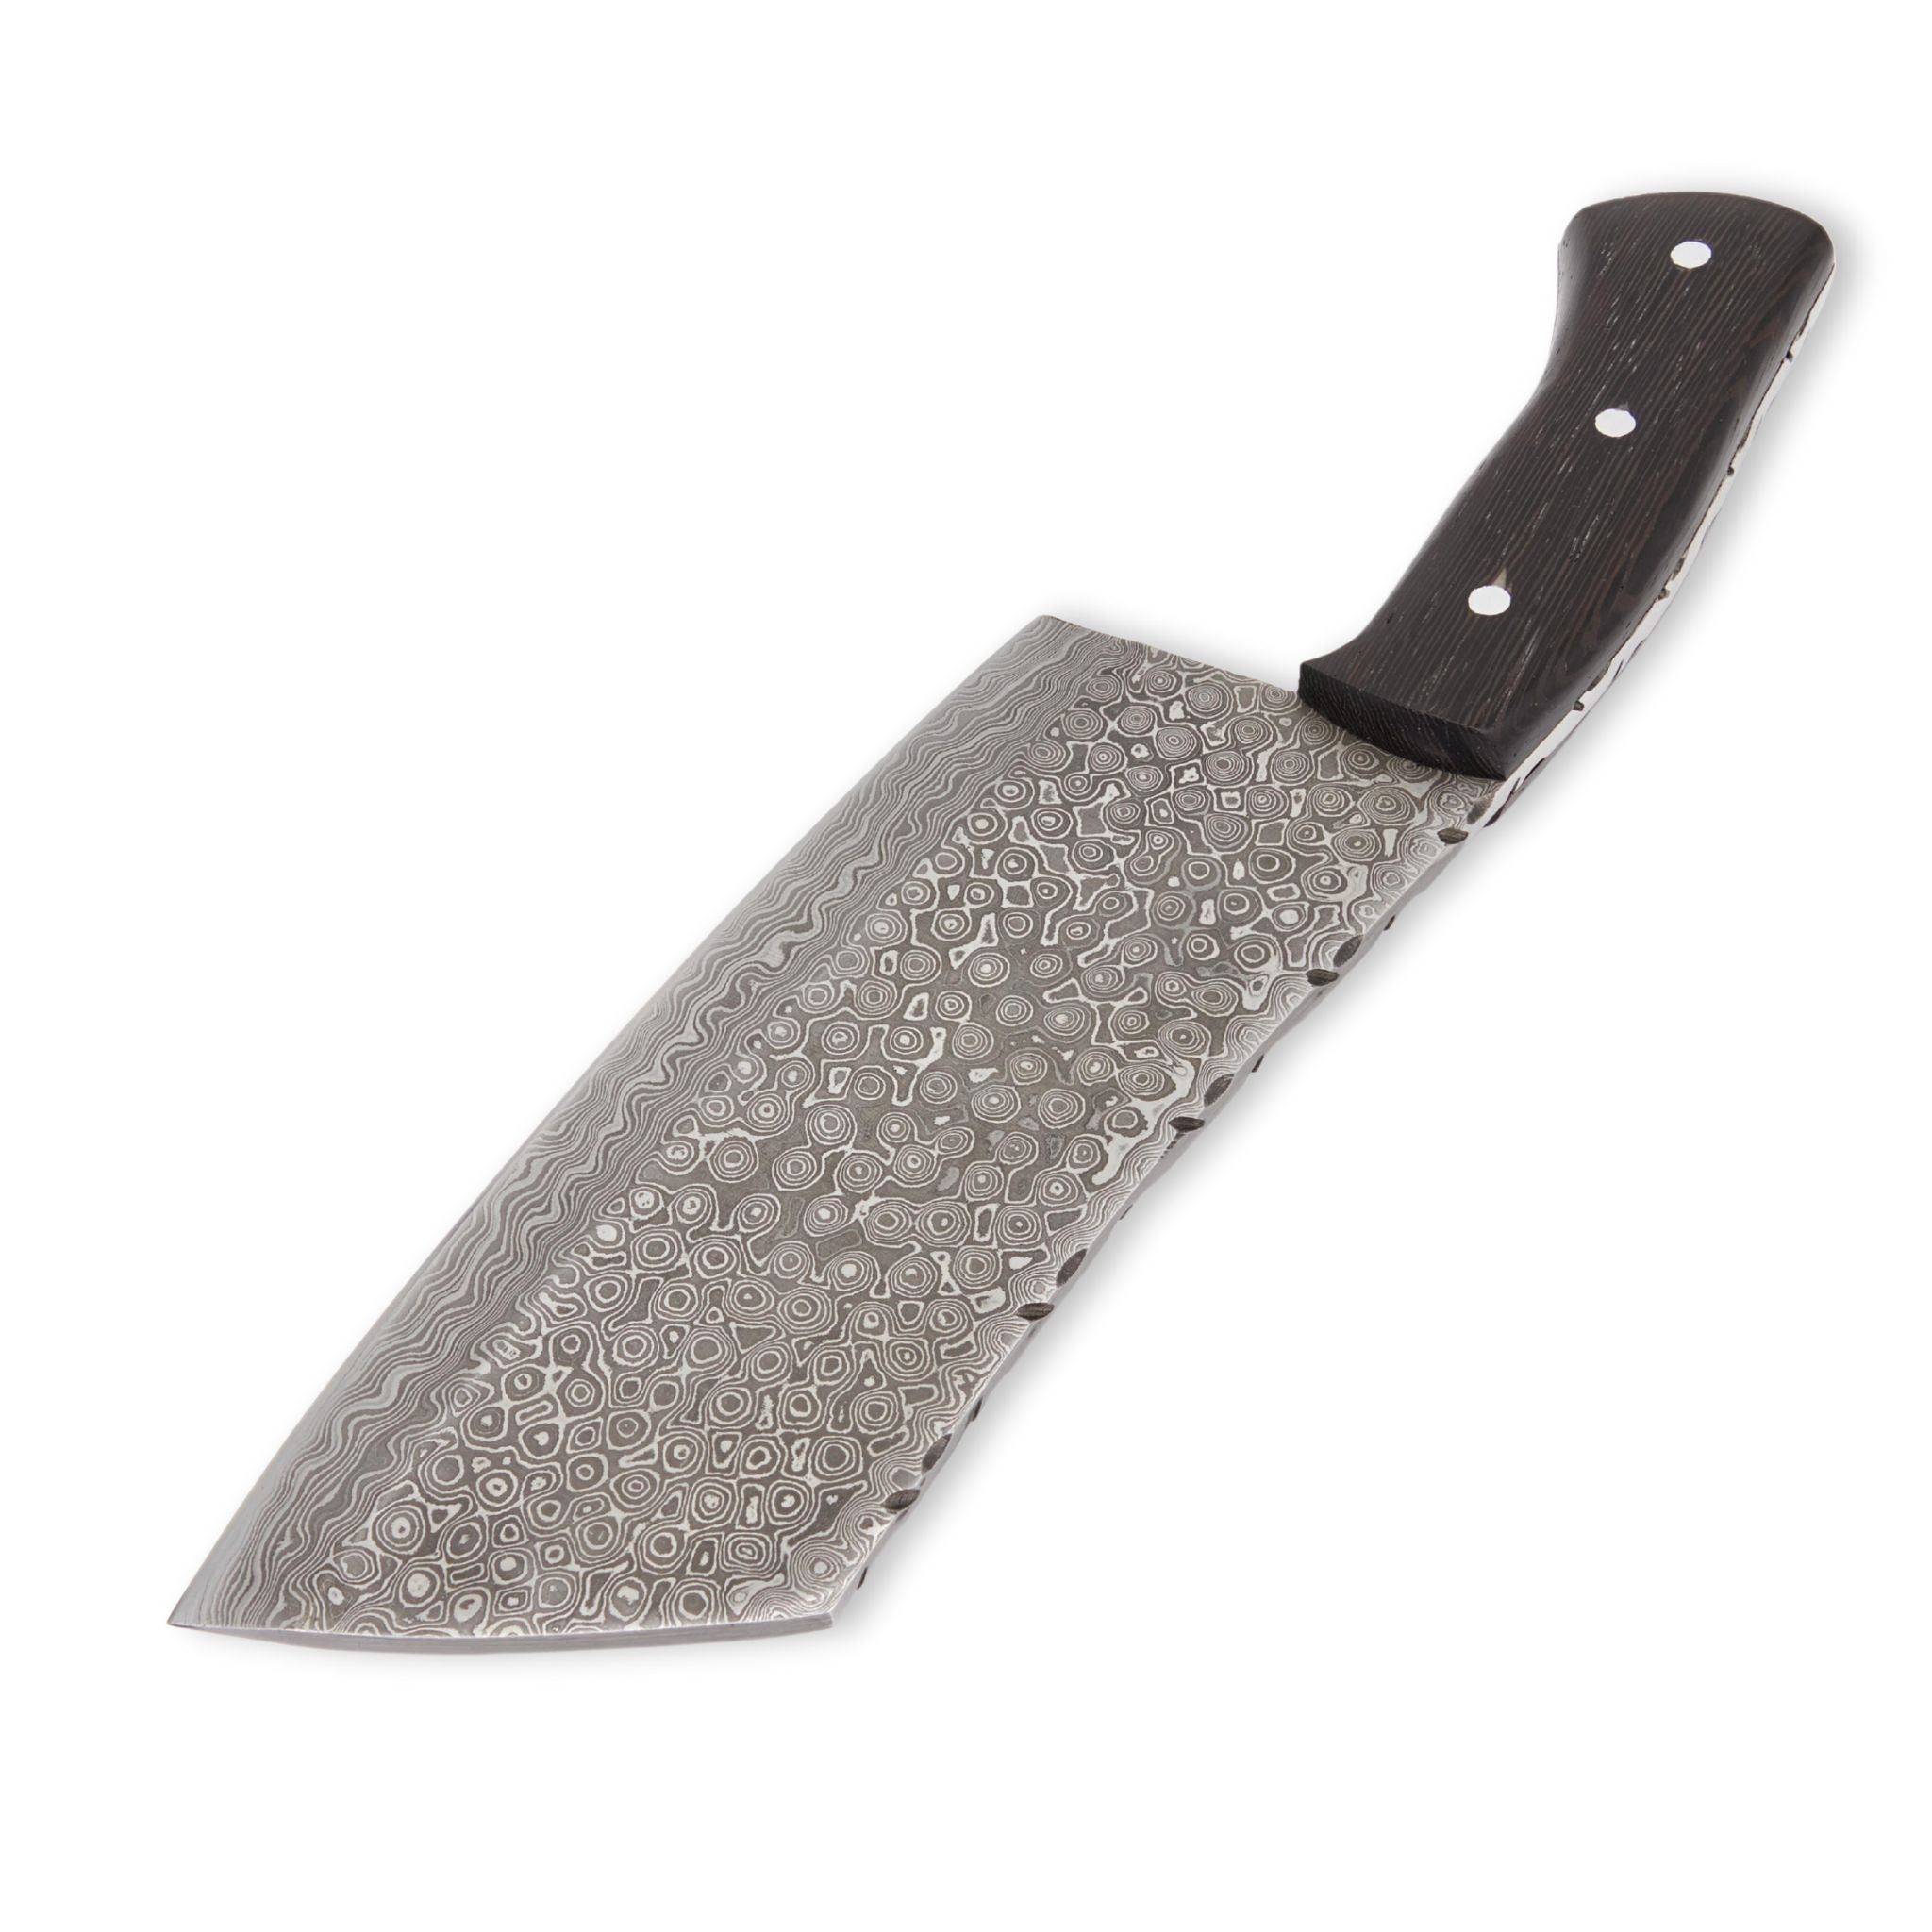 Max Mettle I Handmade Chef's Meat Cleaver Knife Full Tang Damascus Steel Blade Wenge Wood Handle